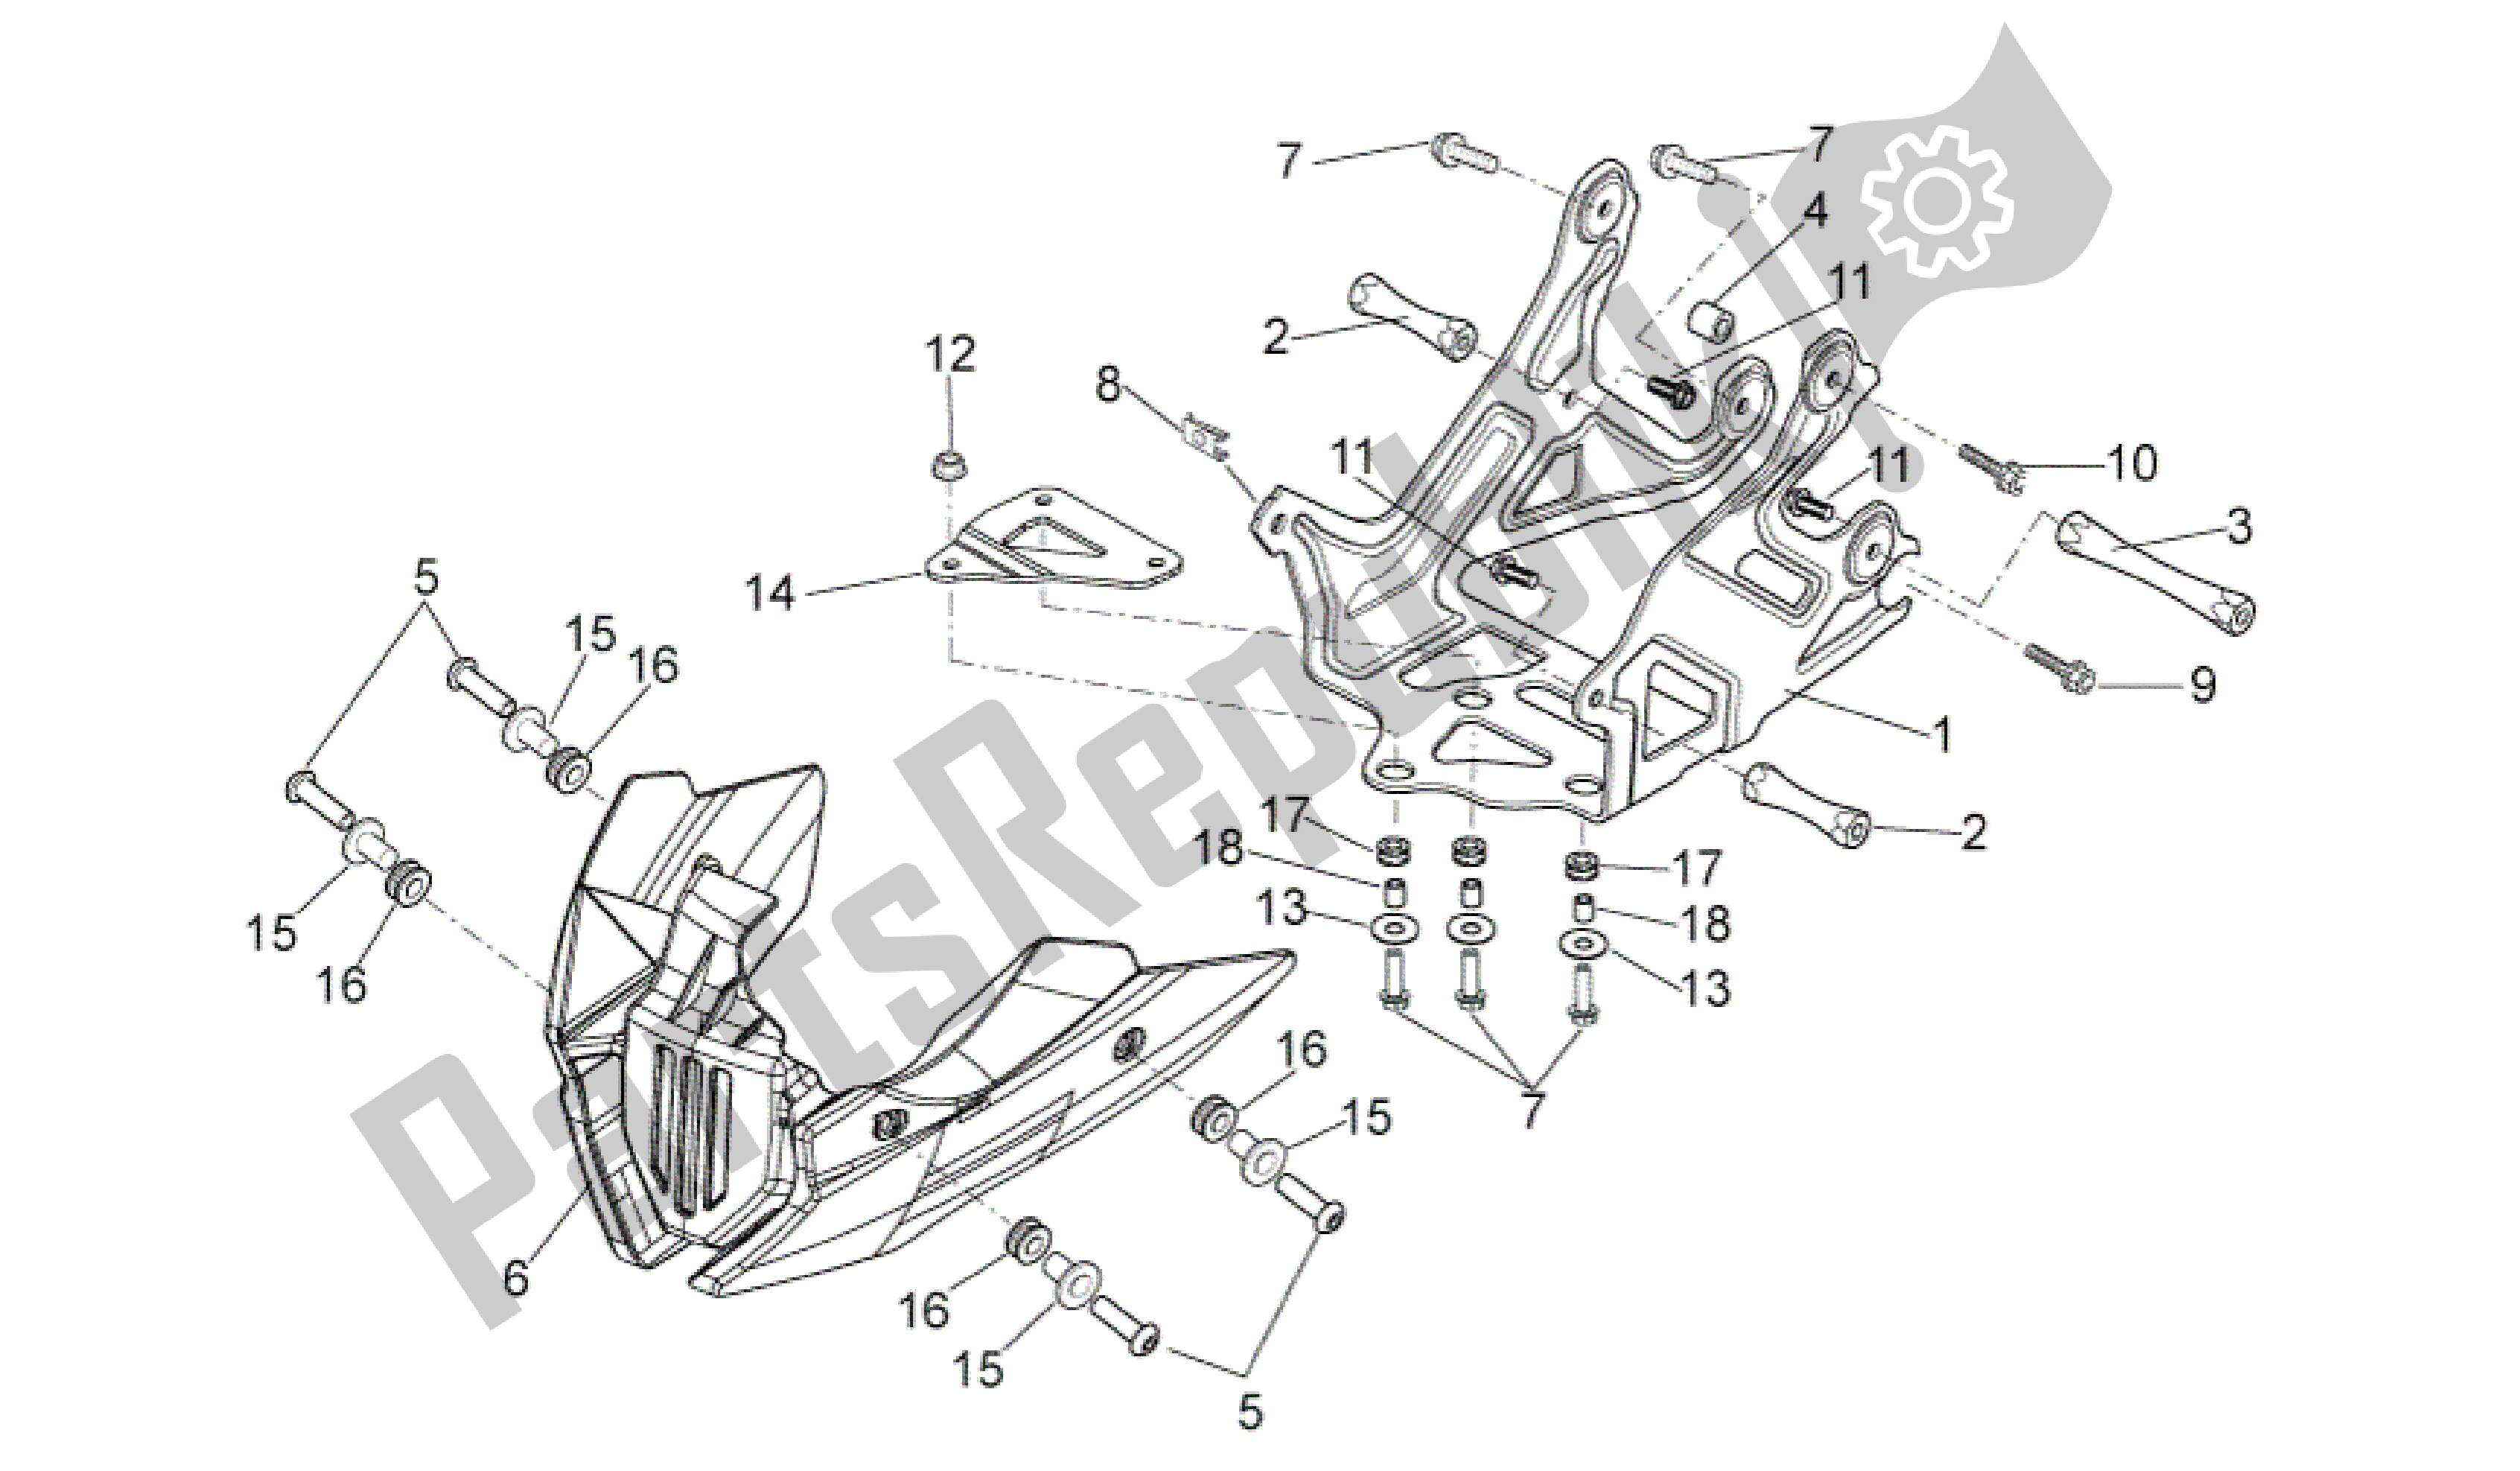 All parts for the Holder of the Aprilia Shiver 750 2011 - 2013